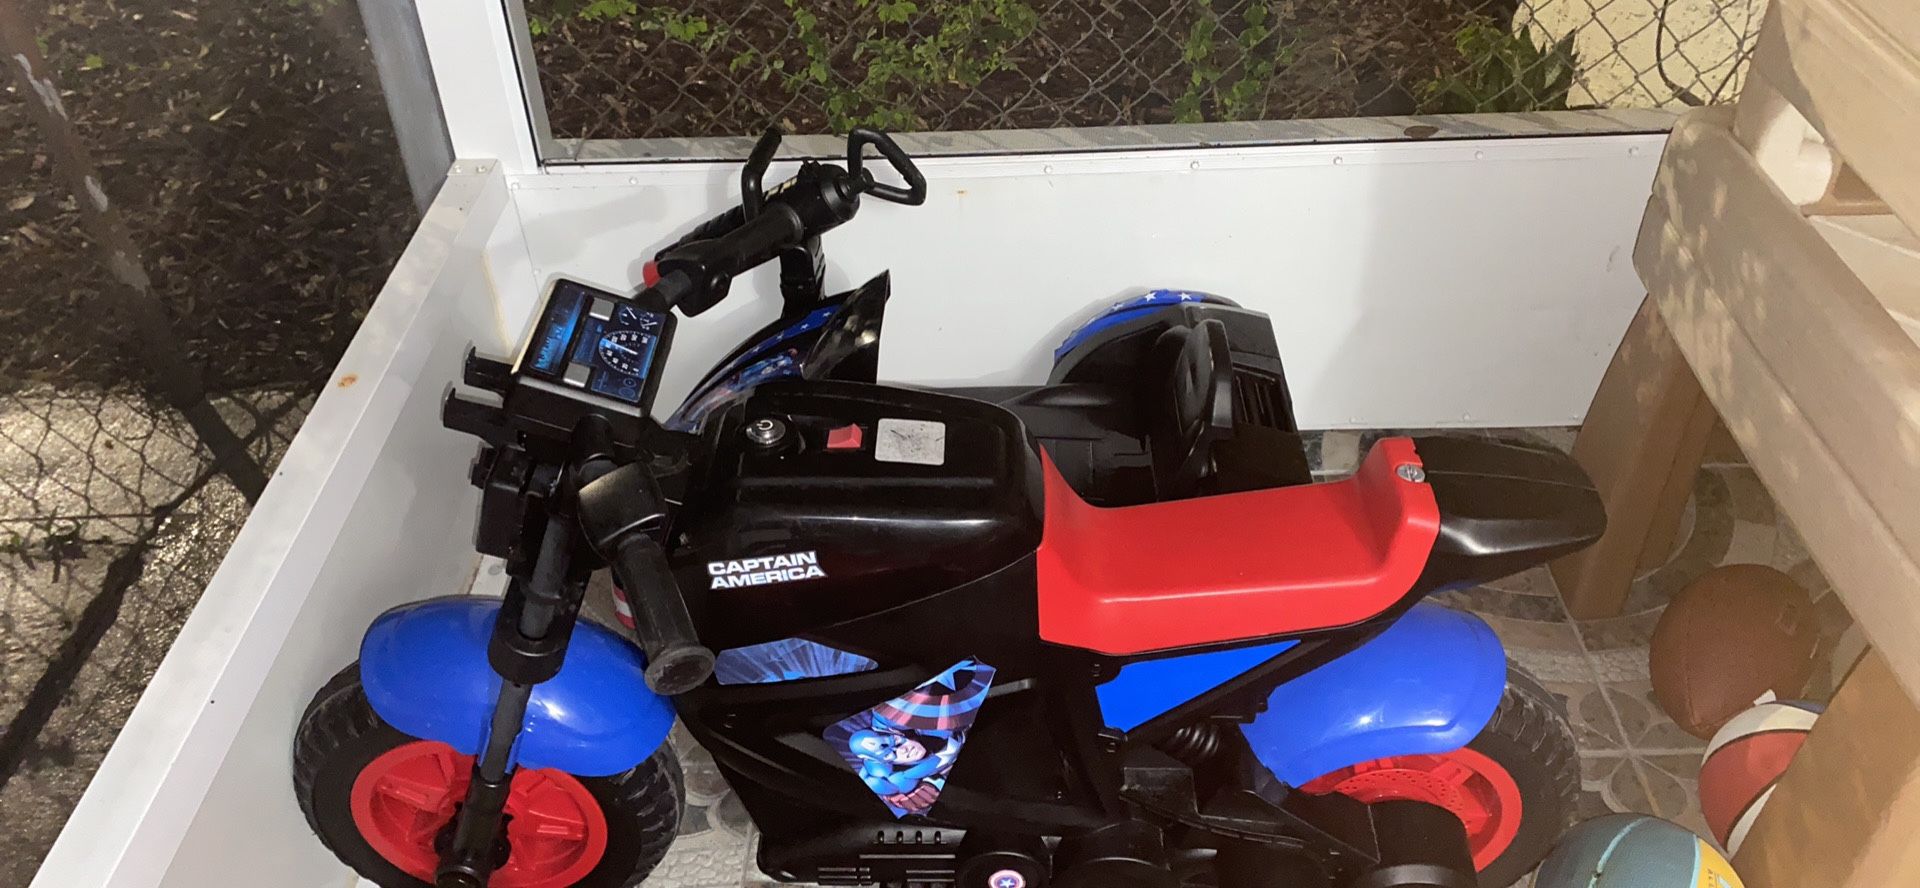 Captain America motorcycle kids ride on